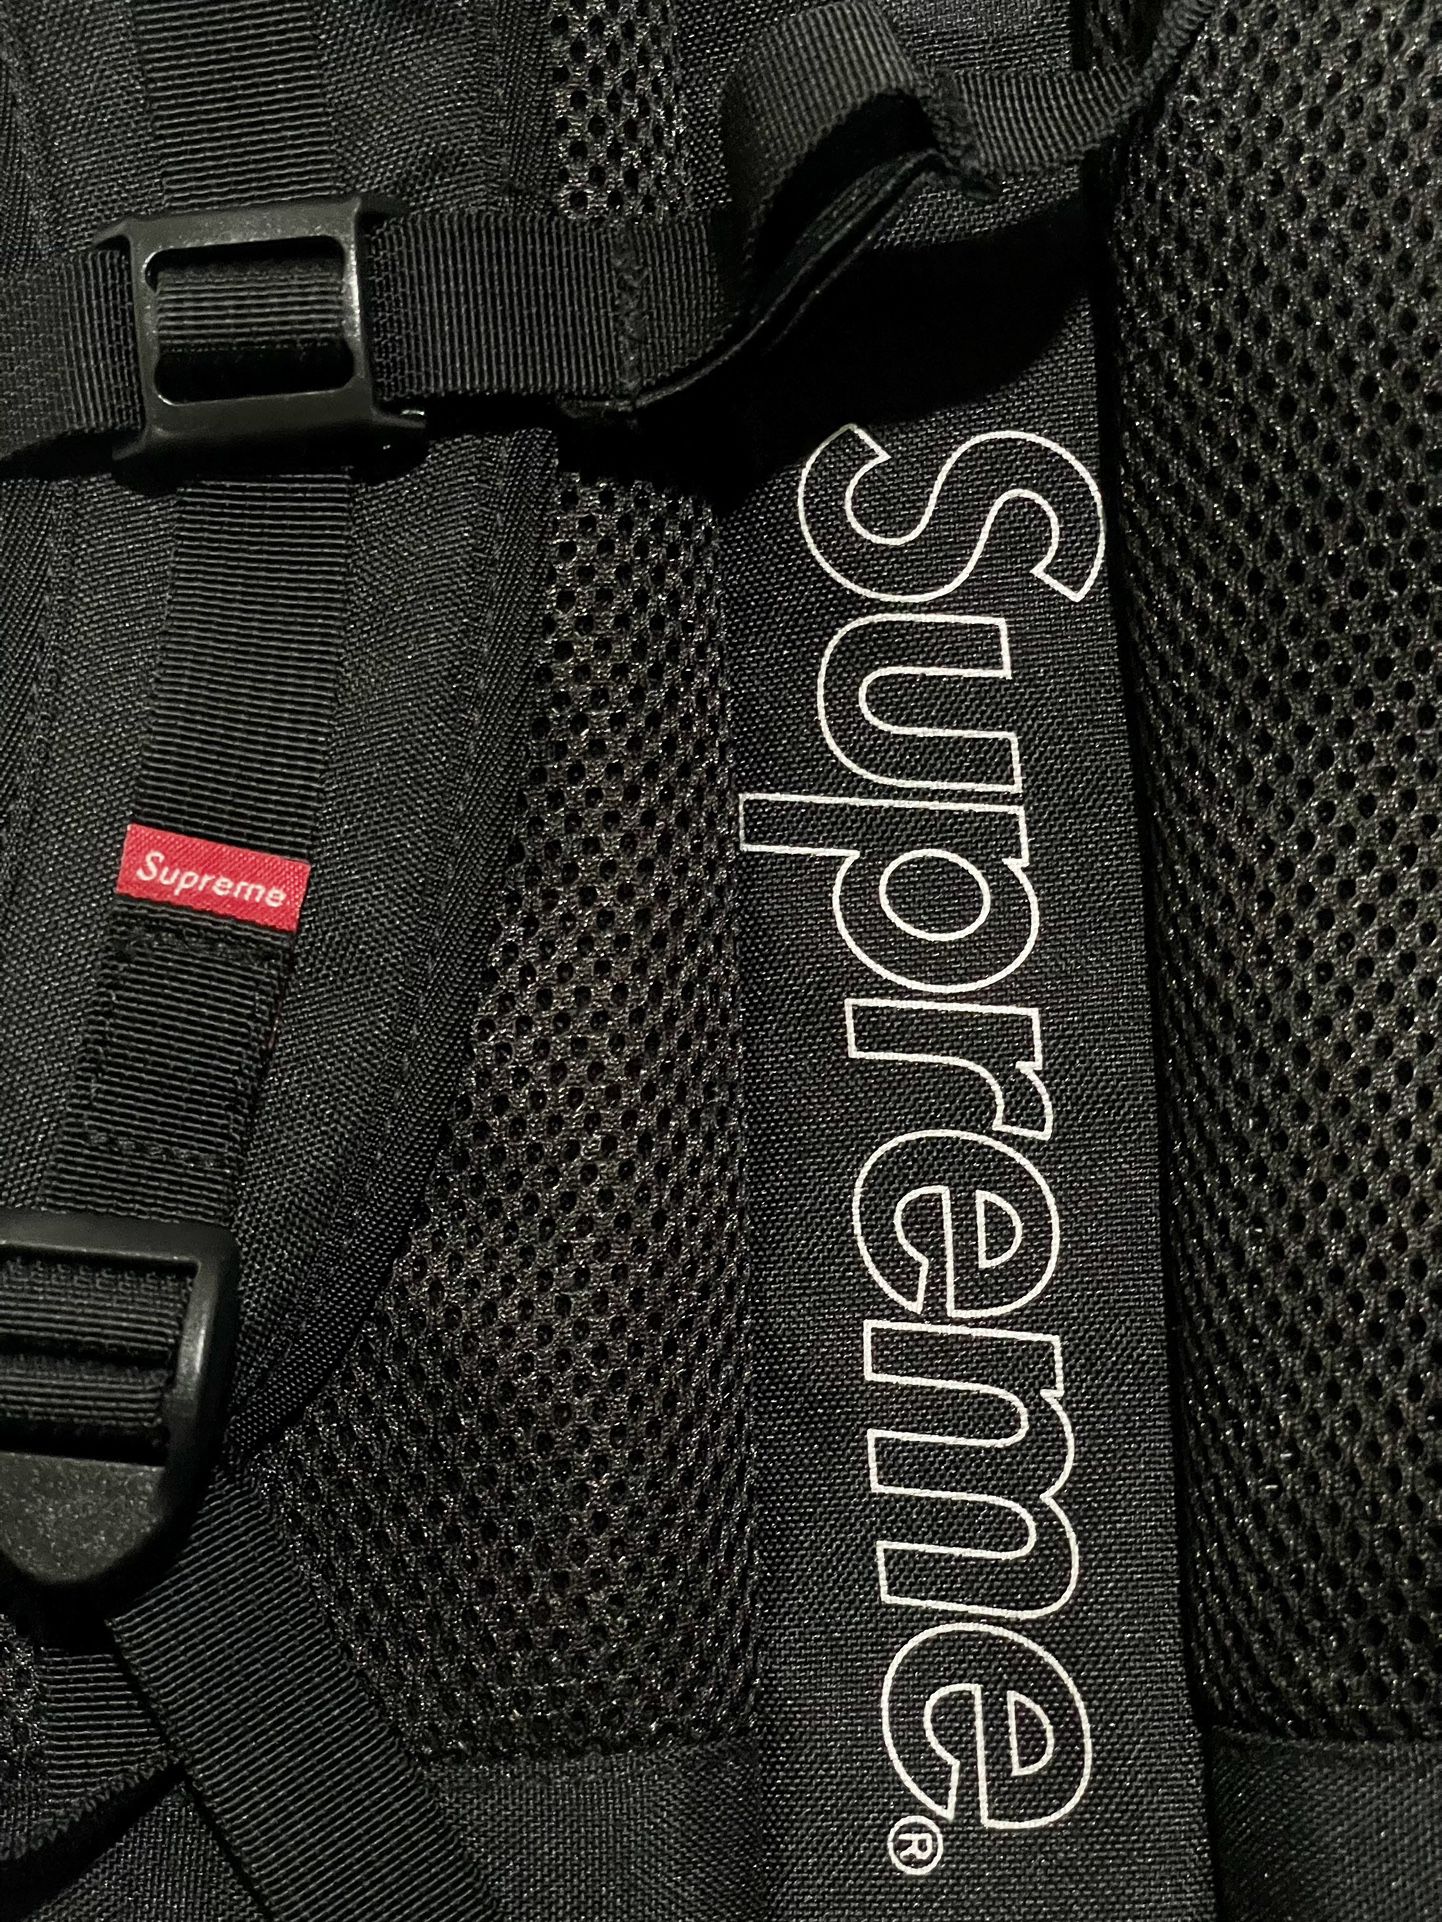 Supreme Backpack (FW20) for Sale in Whittier, CA - OfferUp